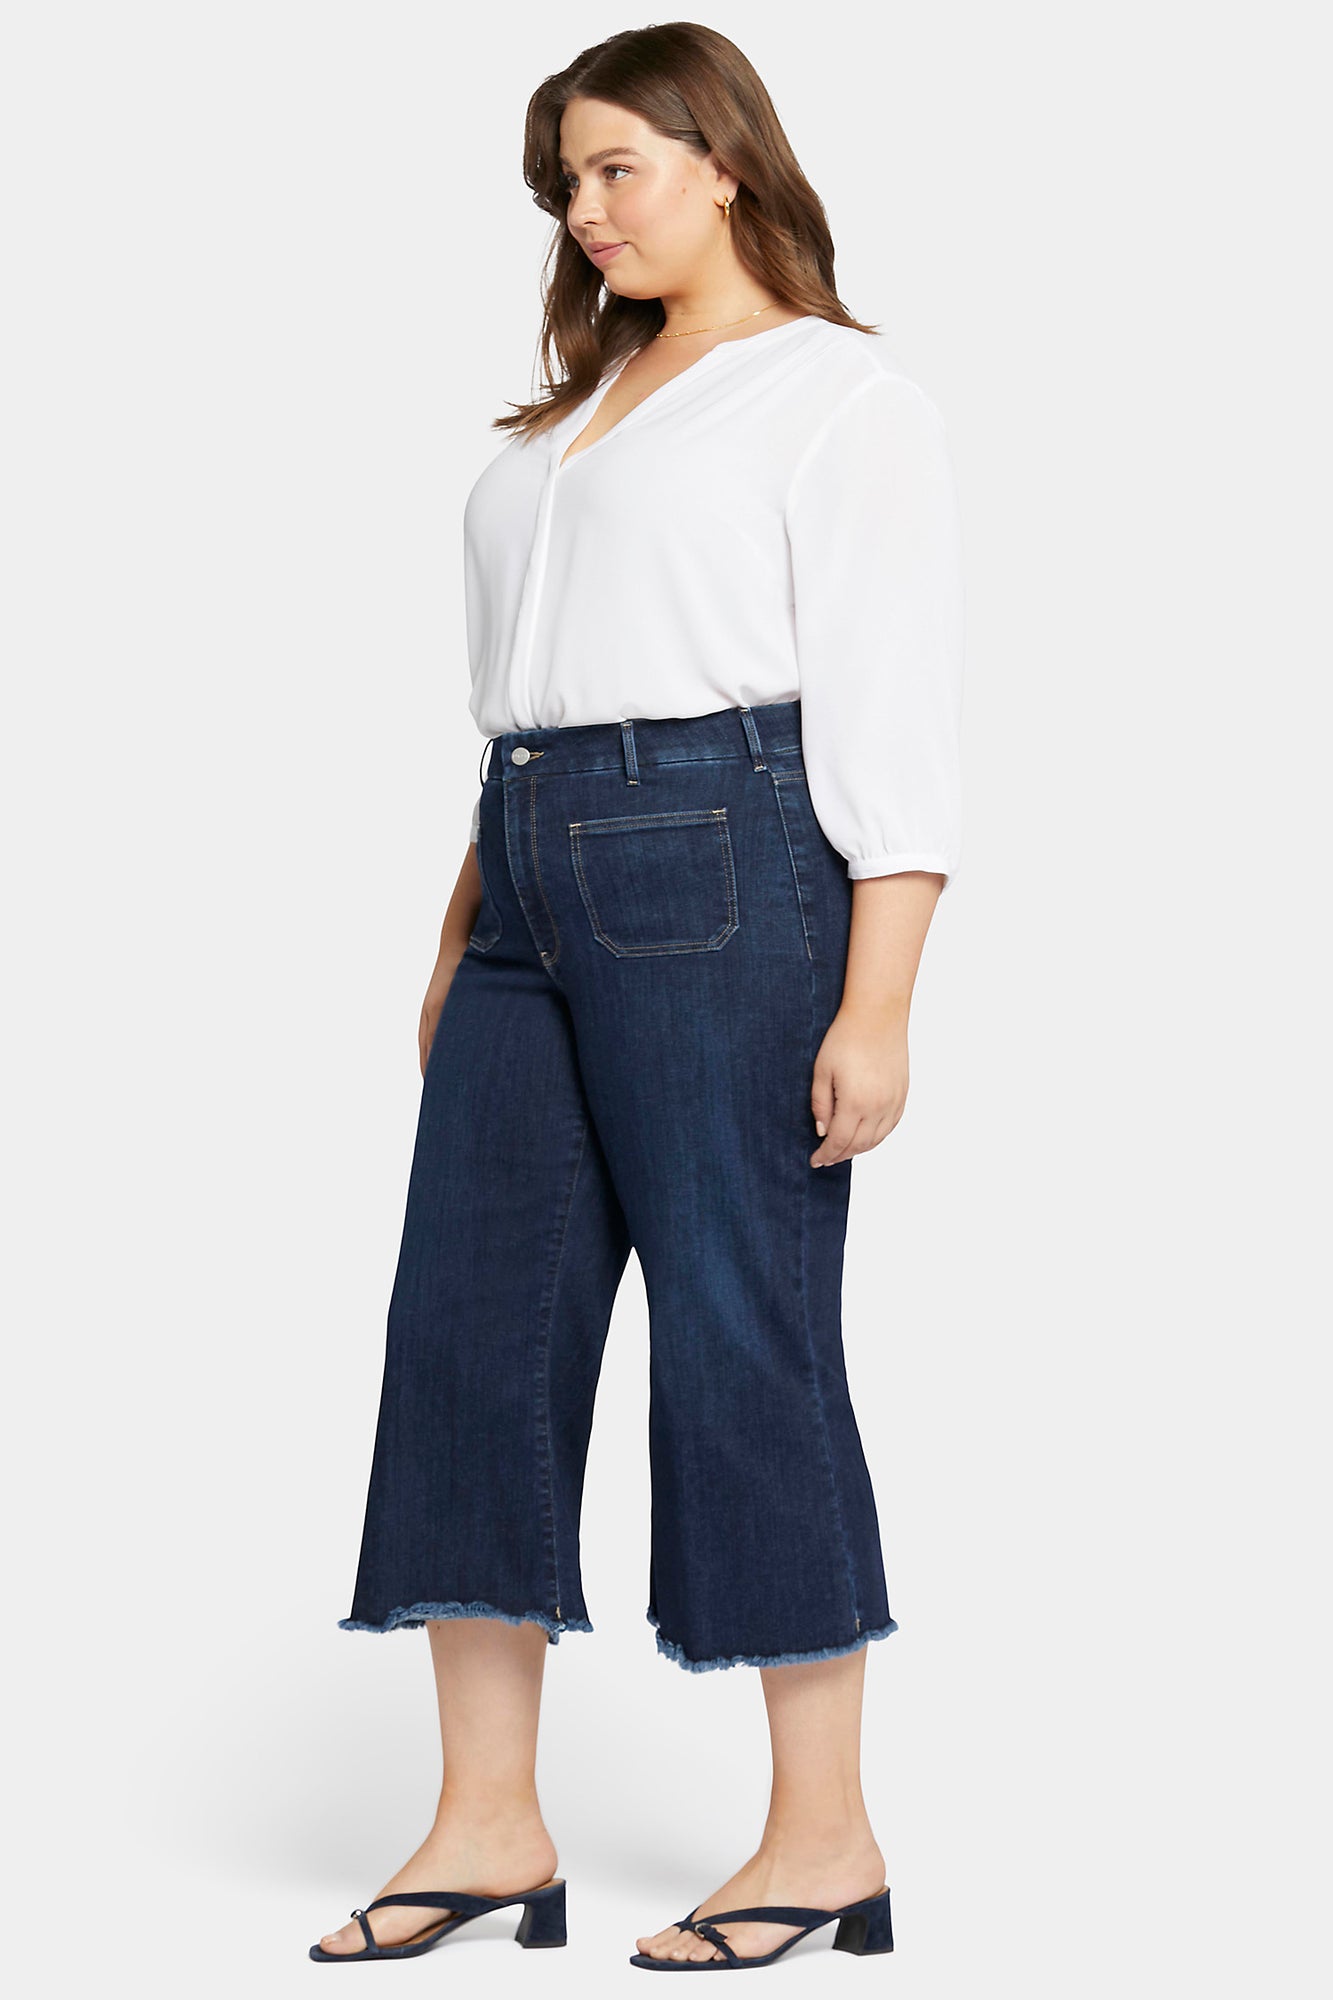 NYDJ Patchie Wide Leg Capri Jeans In Petite Plus Size With Frayed Hems - Sublime